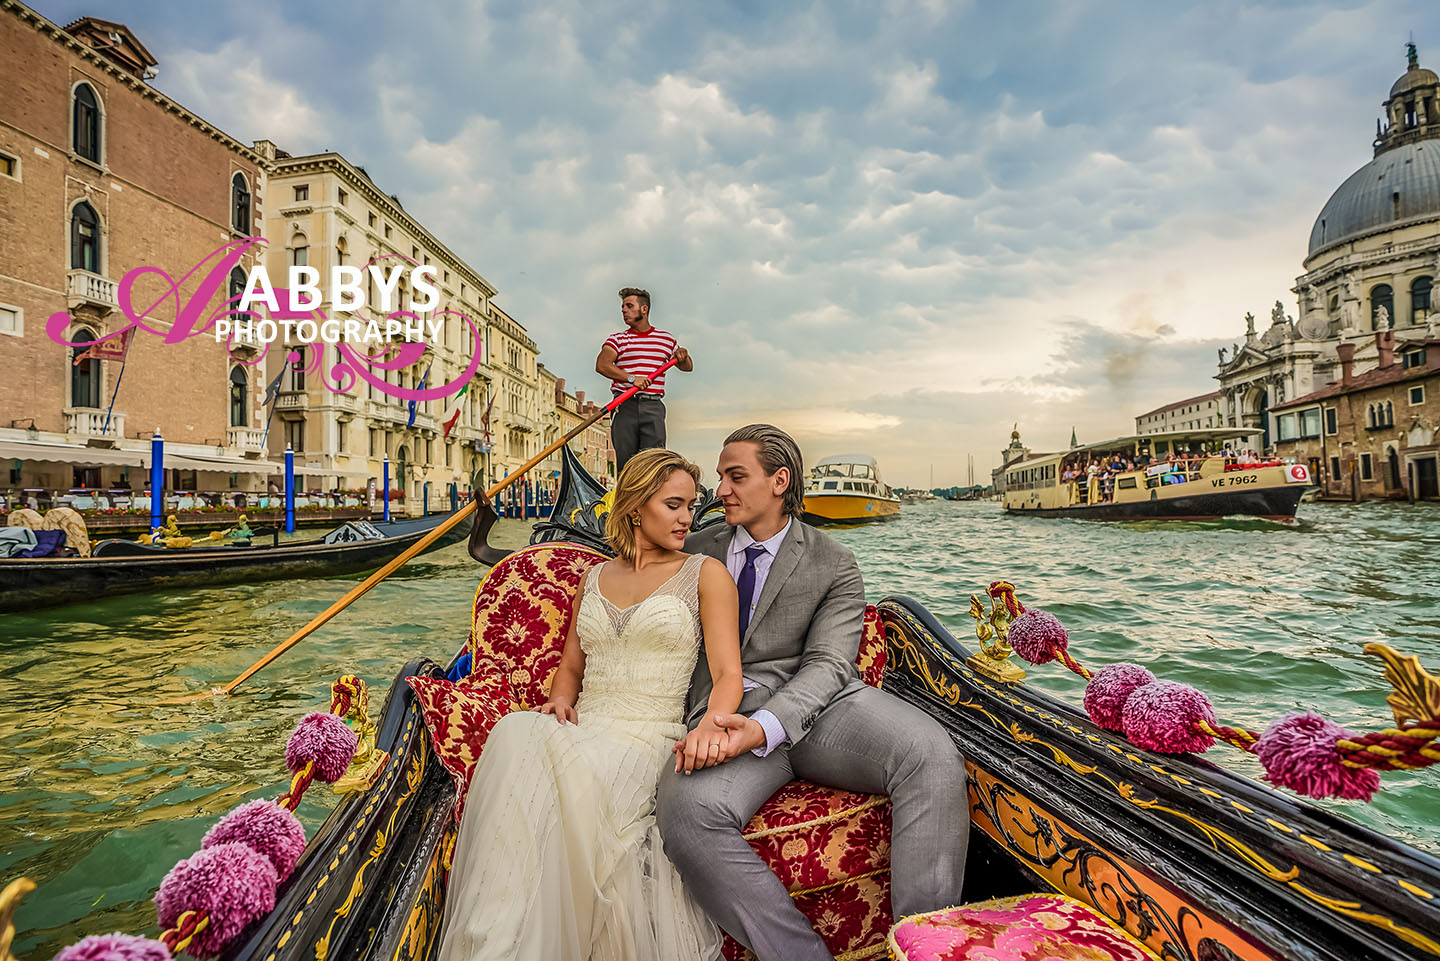 Abbys Photography can make you feel like your wedding or engagement is in Venice instead of Malibu. Call 661-342-4945  